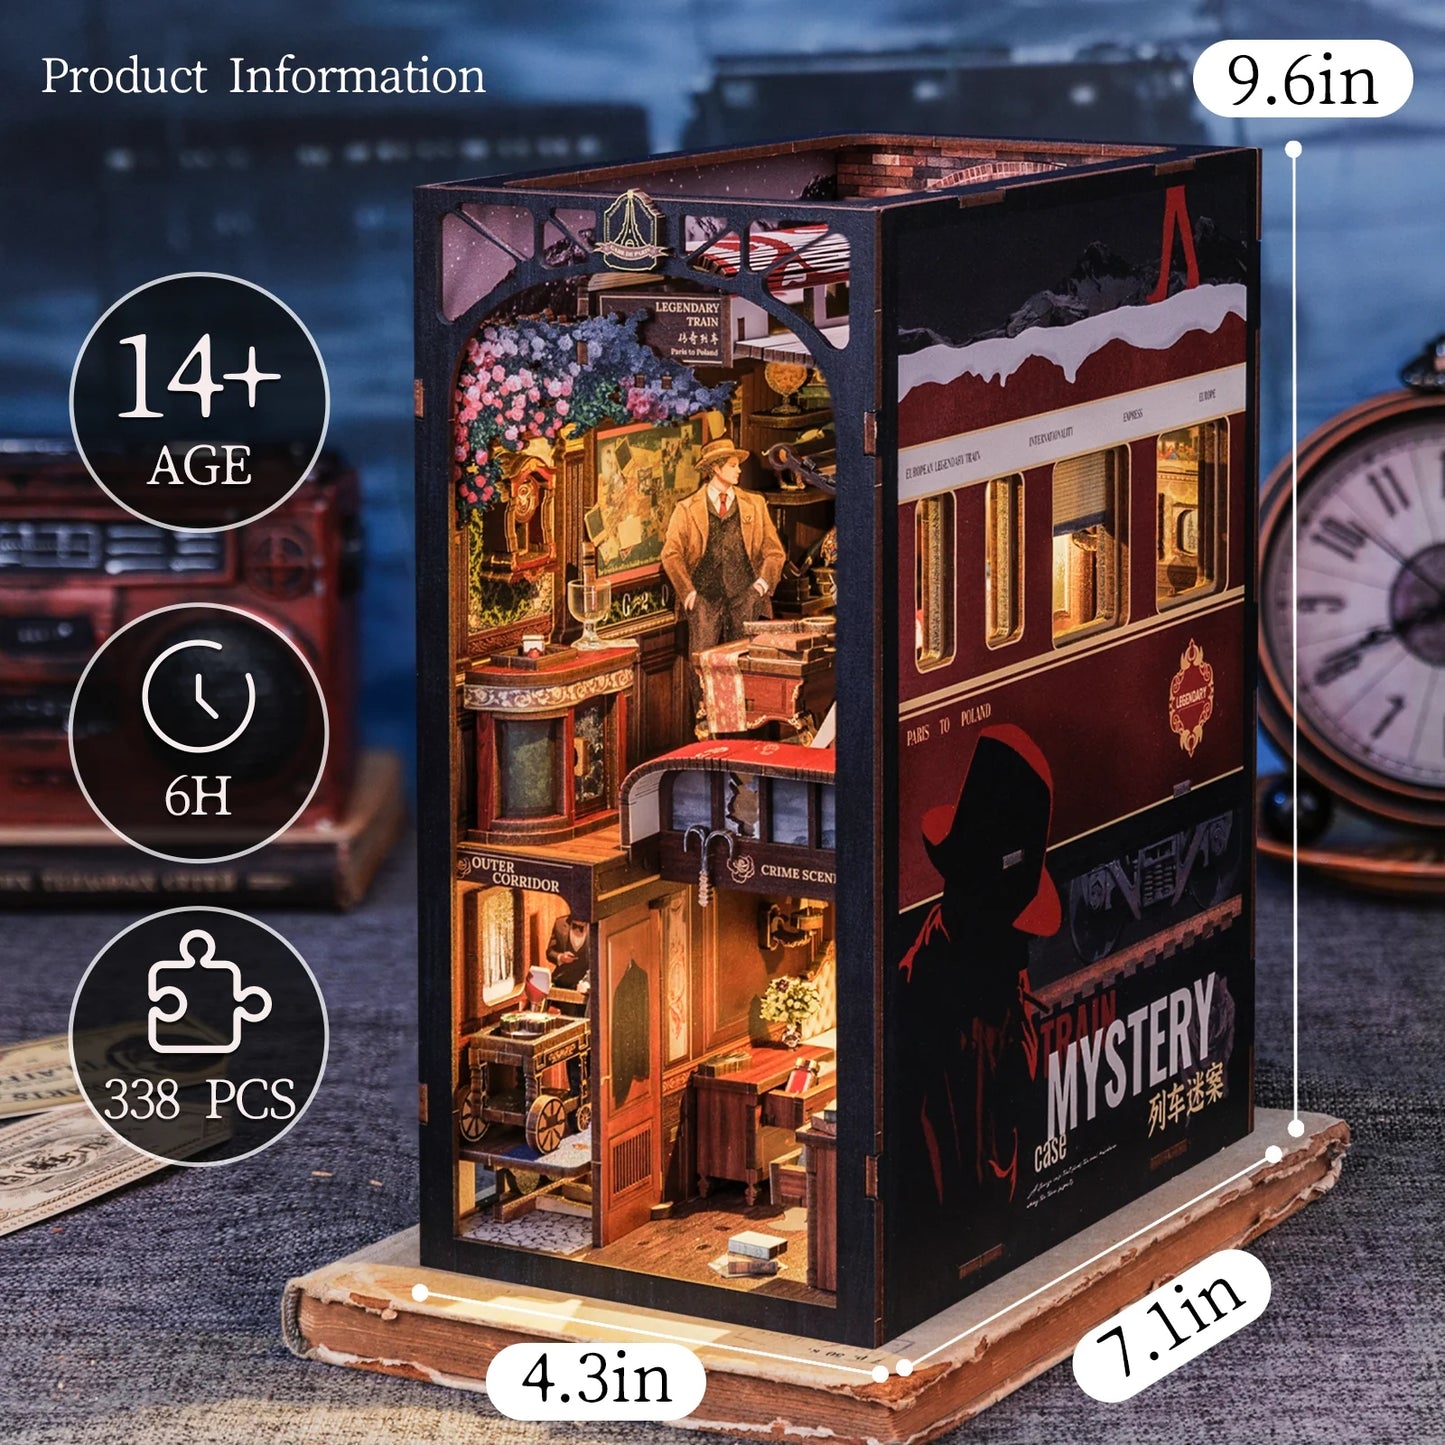 Train Mystery Case | DIY Book Nook Kit | Detective Agency Series | Bookshelf Insert Decor Diorama | 3D Wooden Puzzles Bookend | Book Stand Miniature House